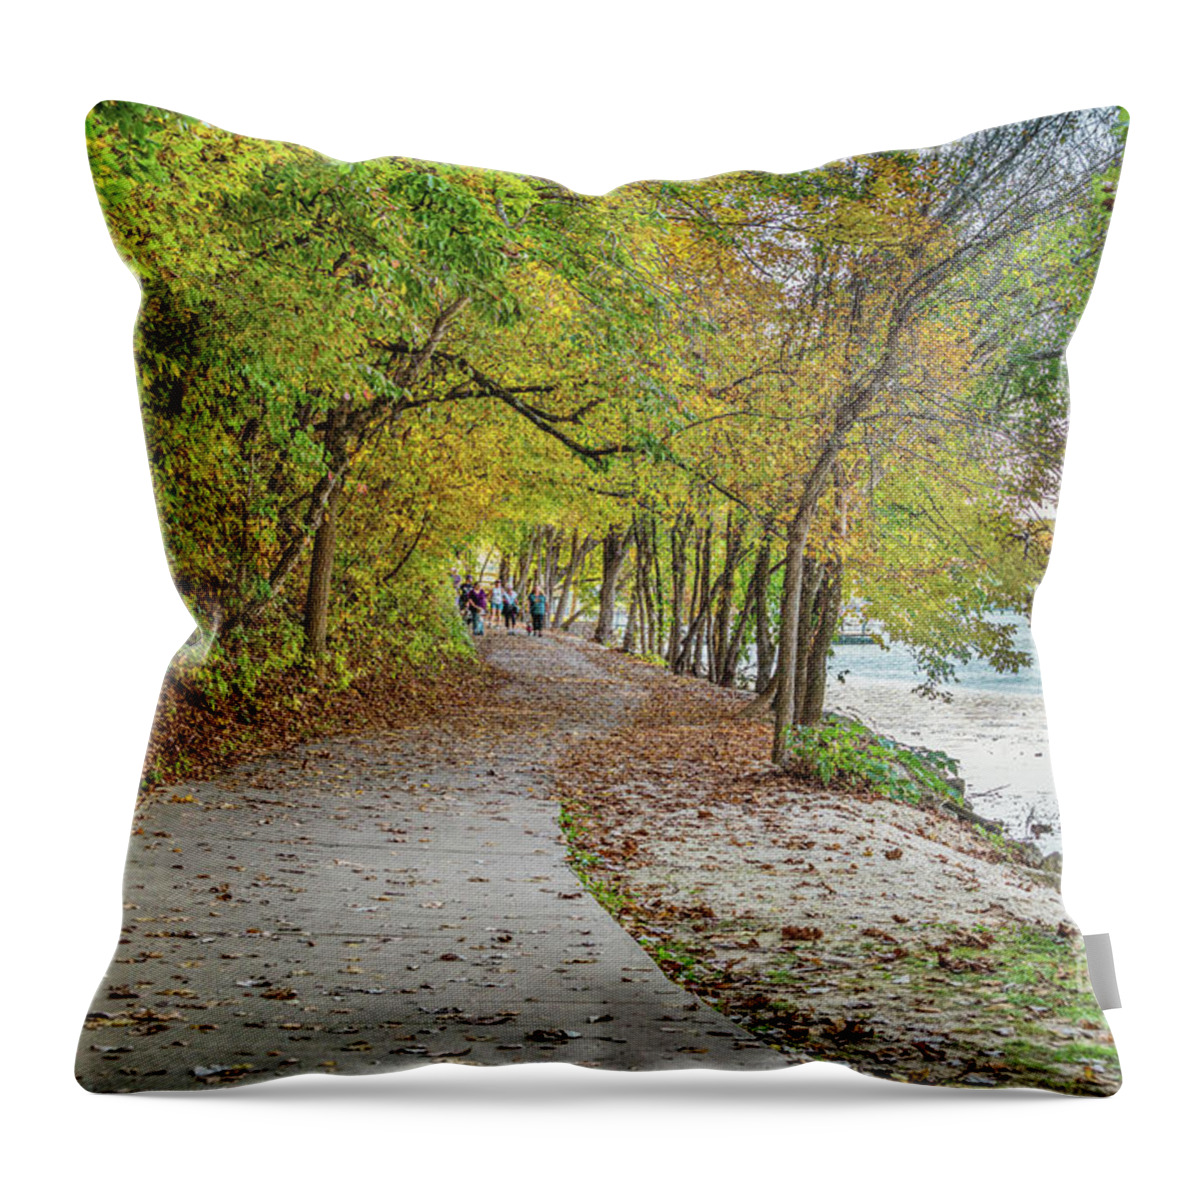 Lake Of The Ozarks Throw Pillow featuring the photograph Ha Ha Tonka Walkway Tunnel by Jennifer White